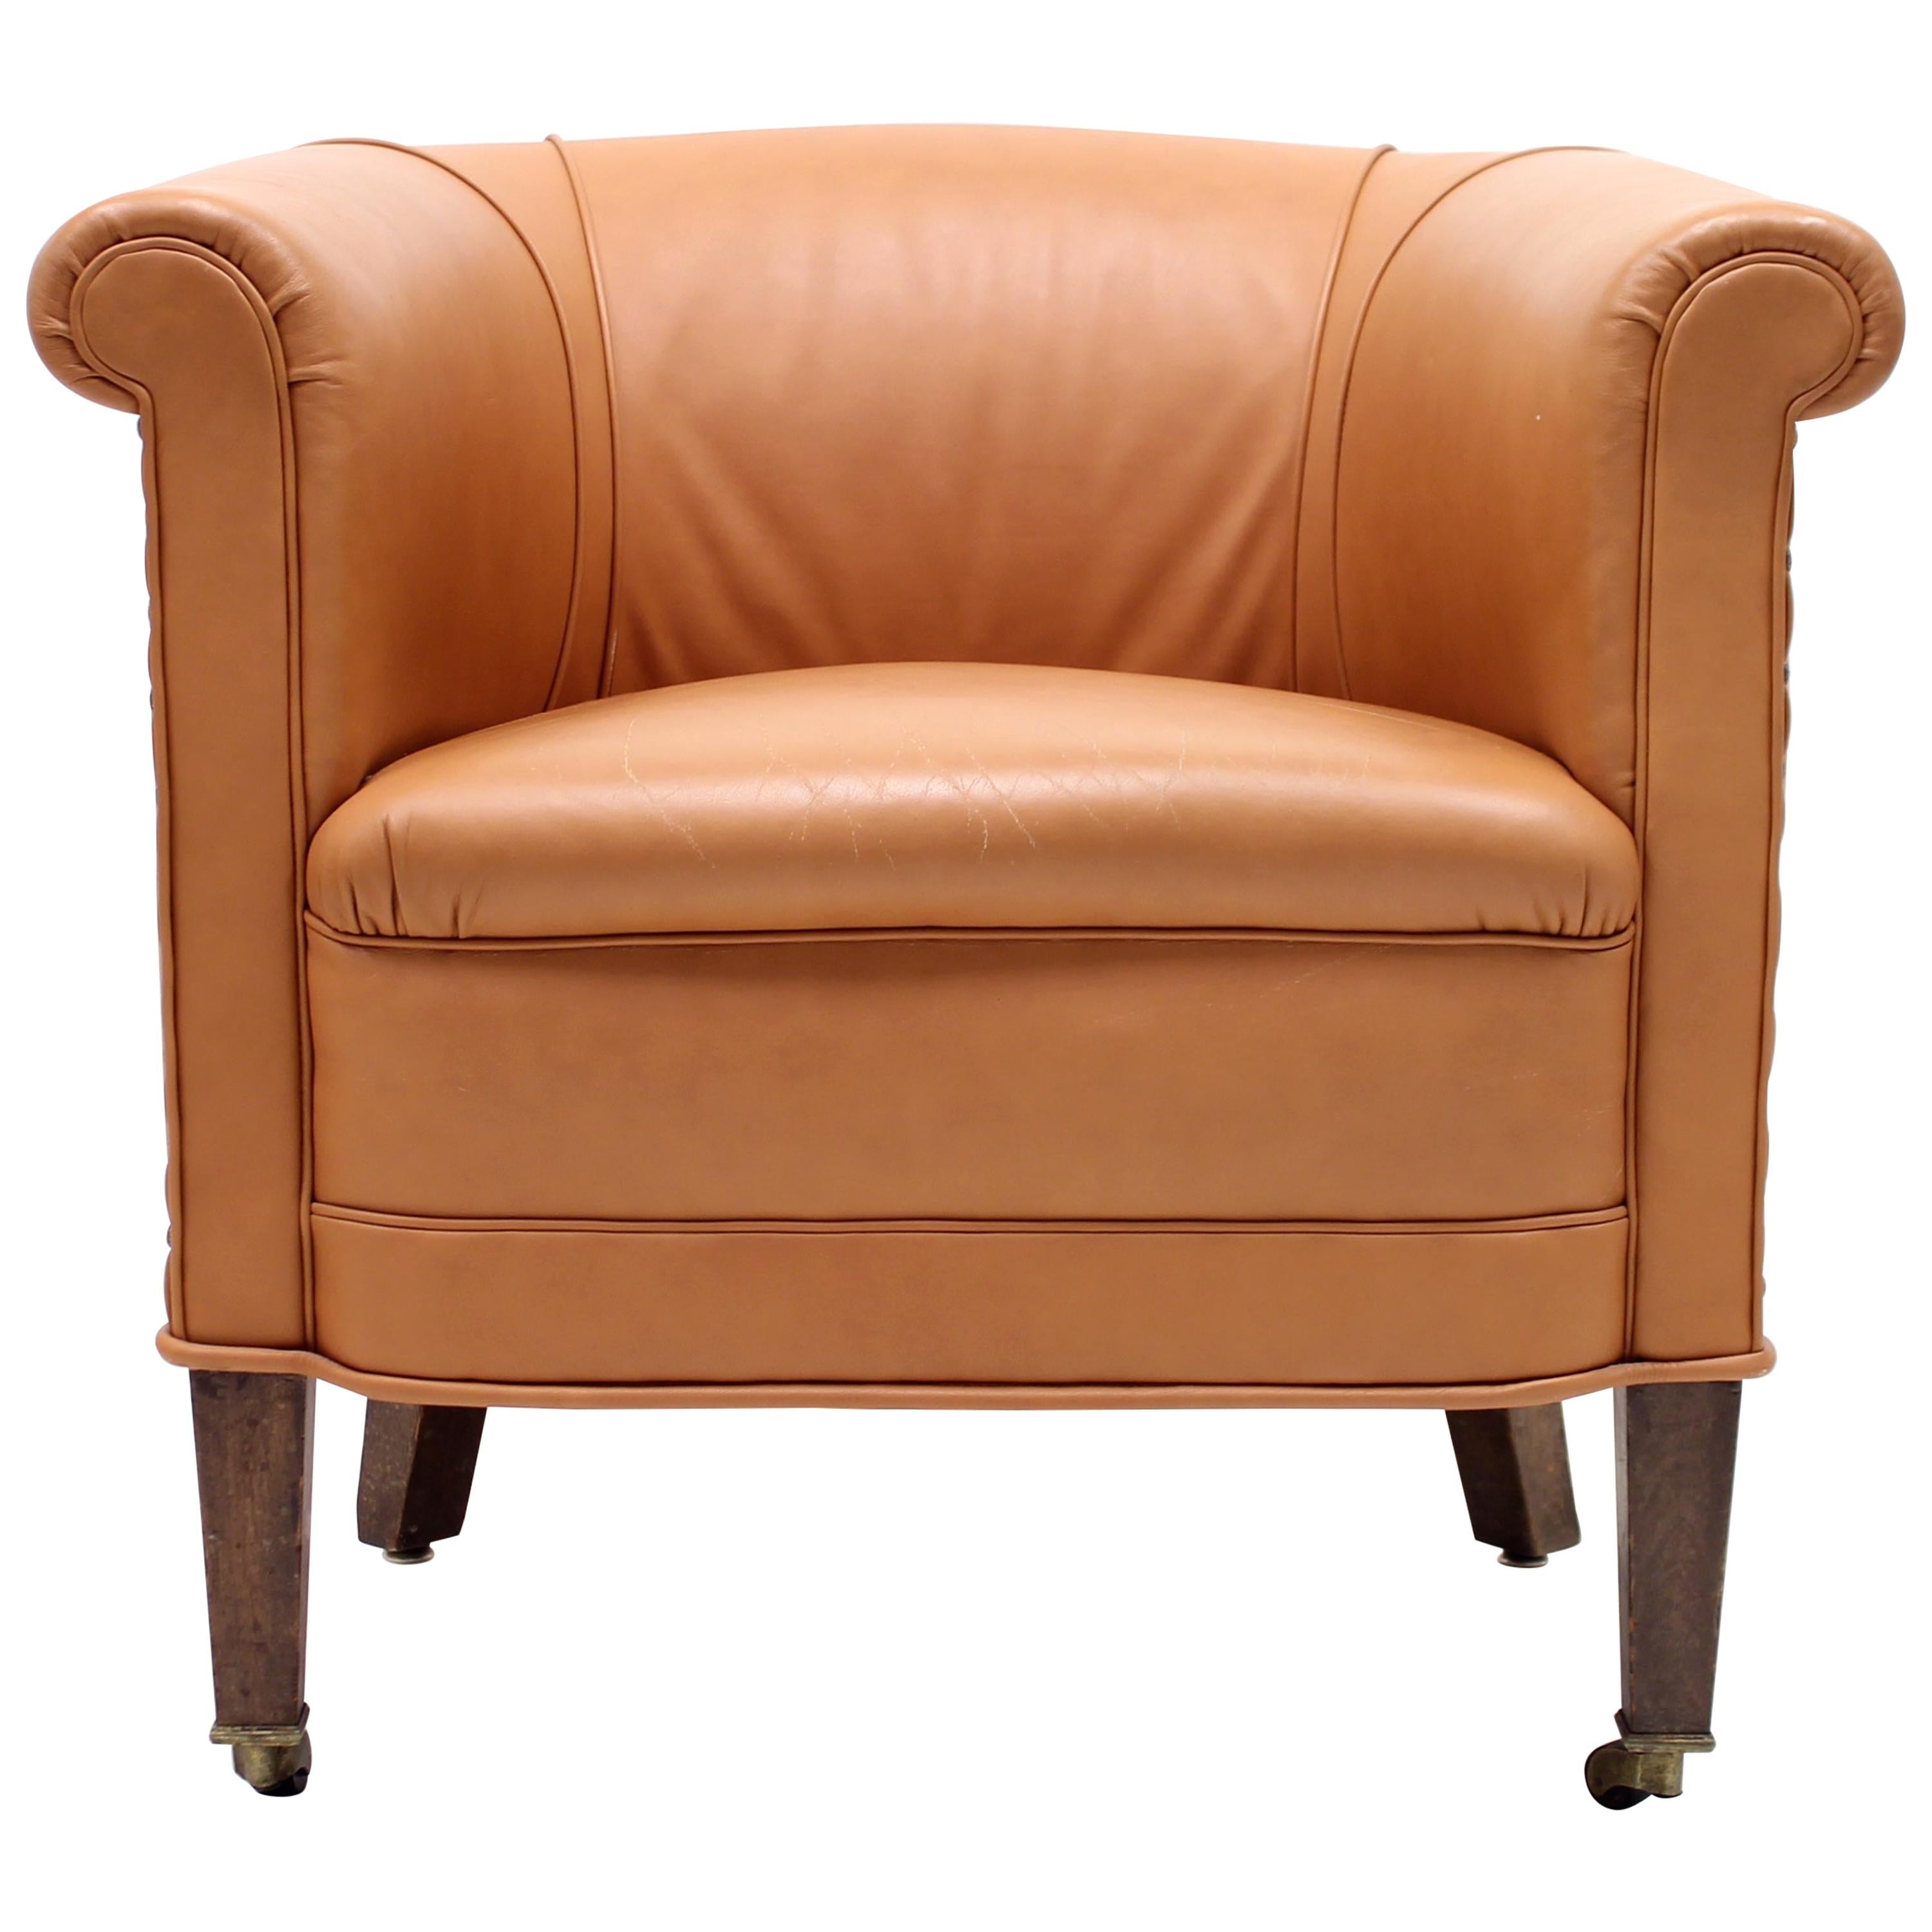 Brown Leather Club Chair on Castors, 1930s